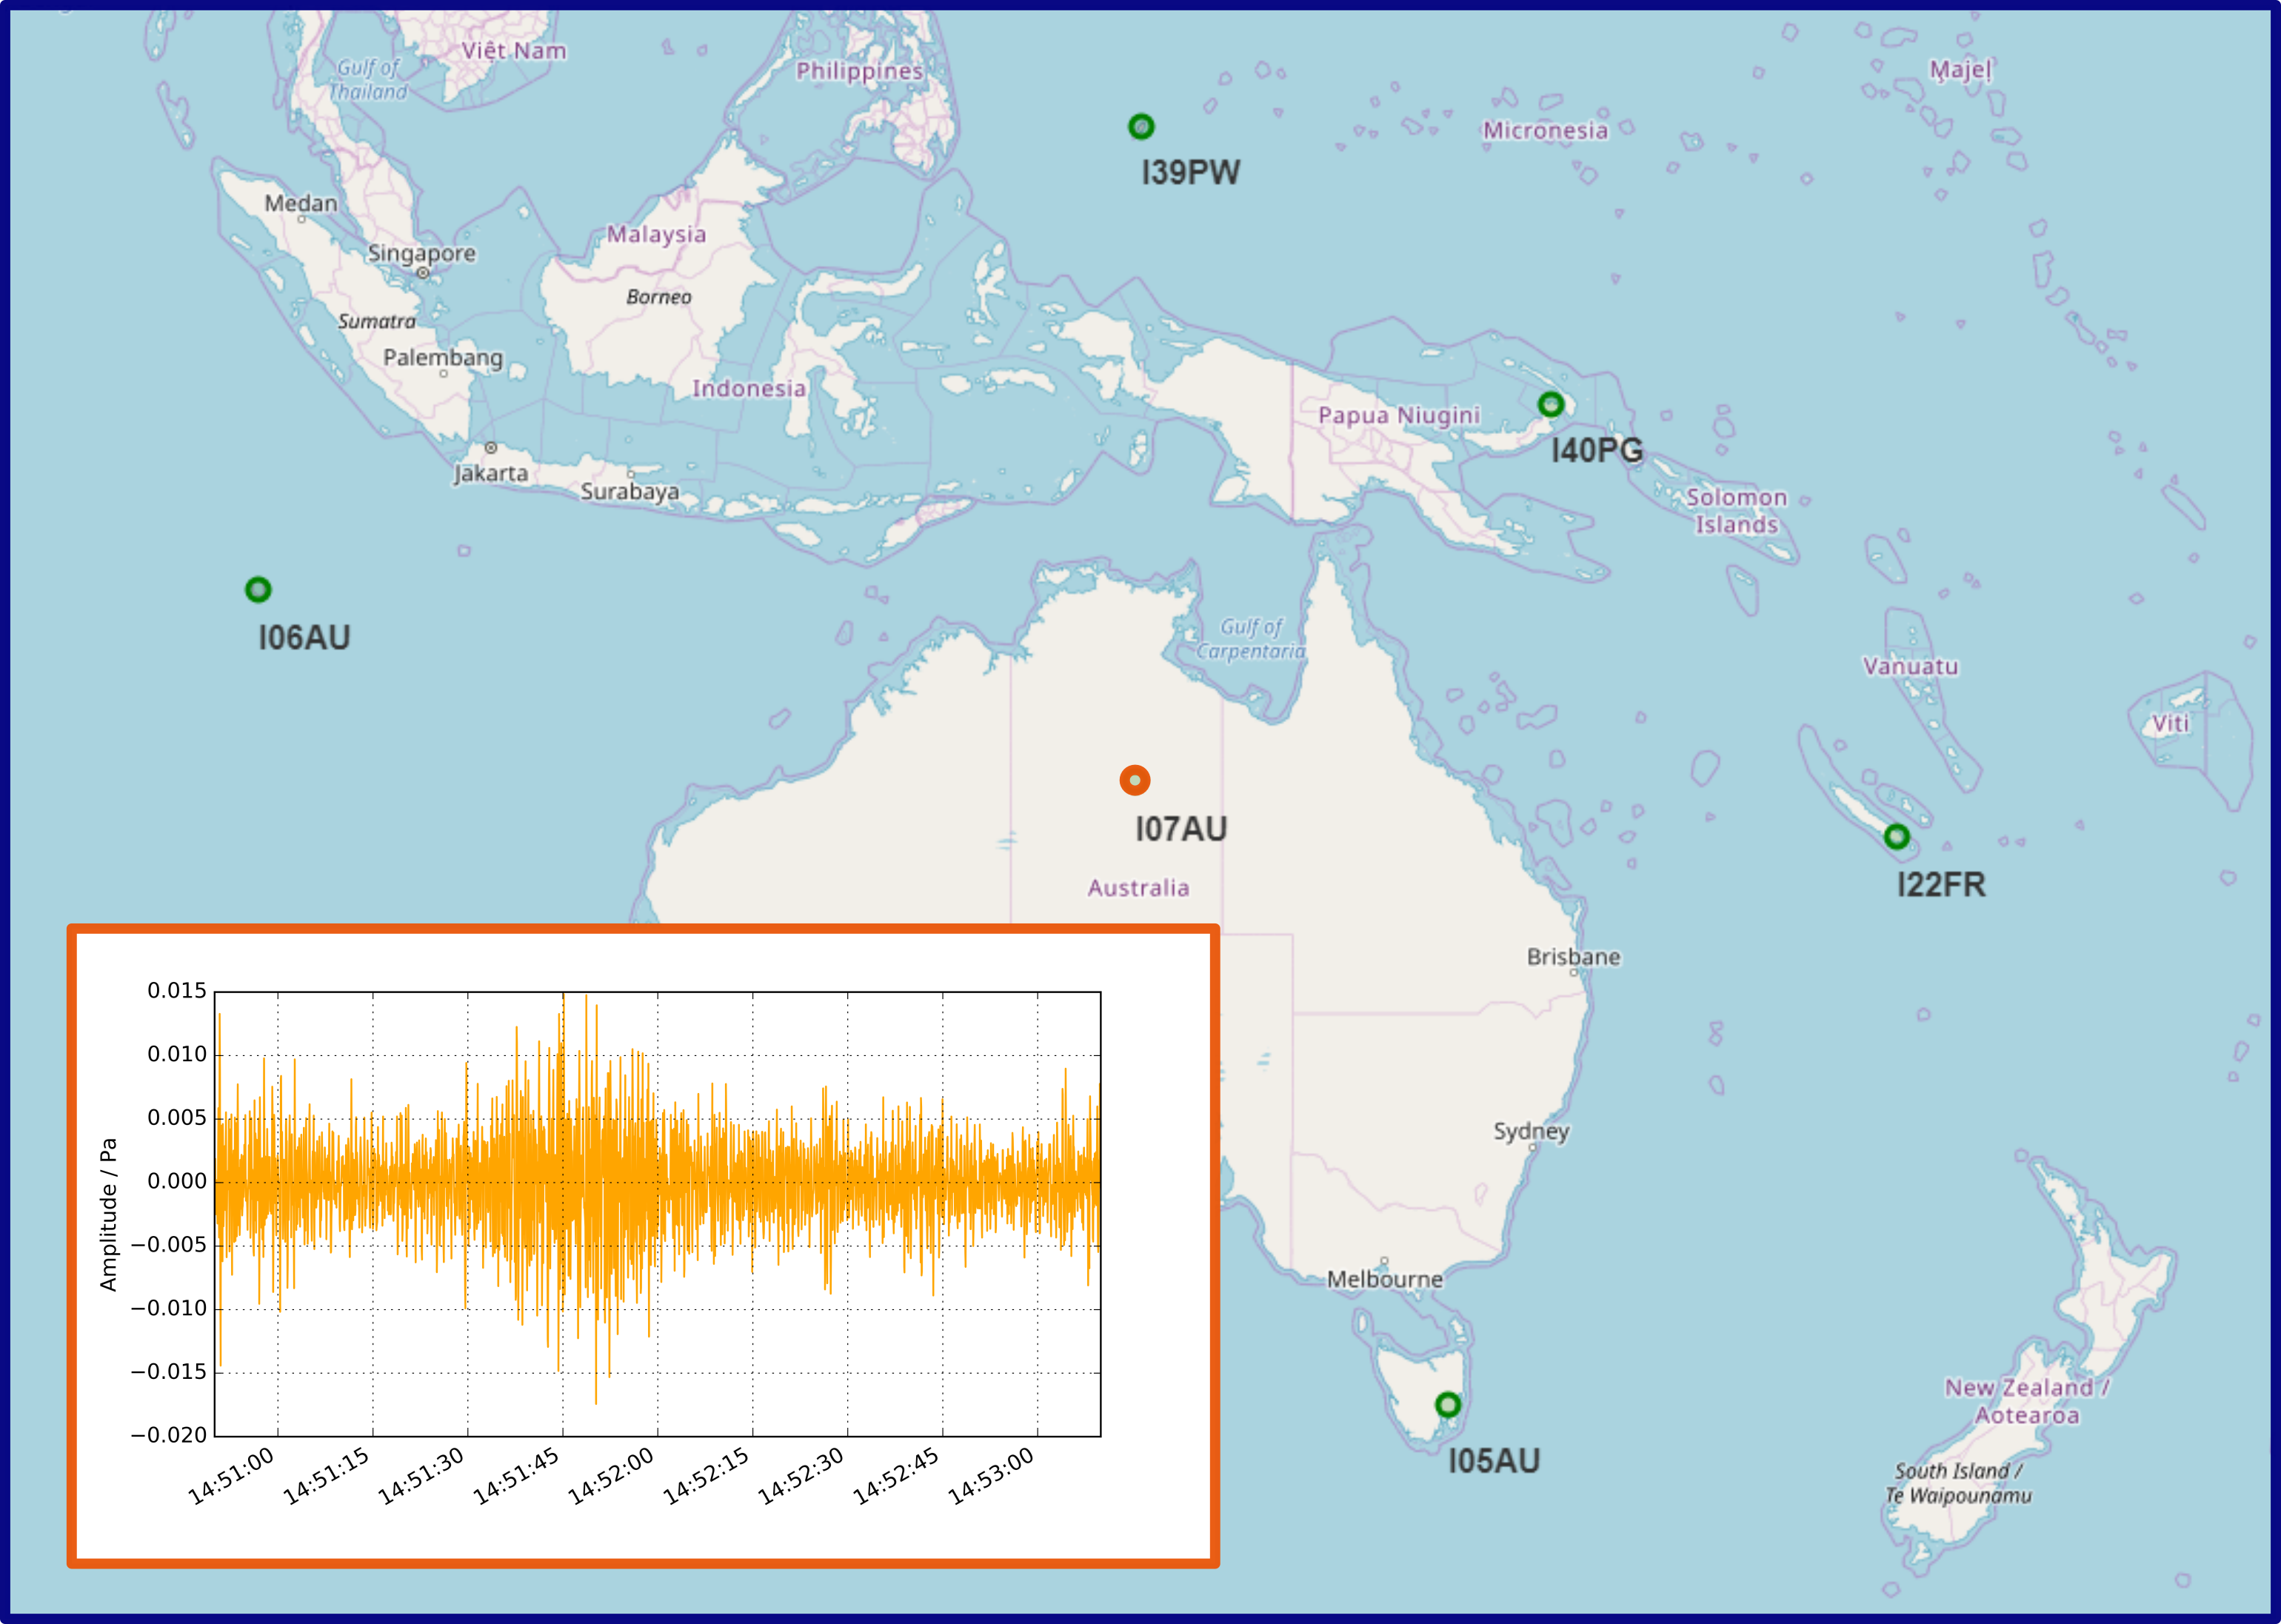 The signal of the asteroid that entered the atmosphere on 19 May 2019 over Australia was detected on at least 5 infrasound stations. The pressure change in the atmosphere is clearly visible in the waveforms (here: I07AU).